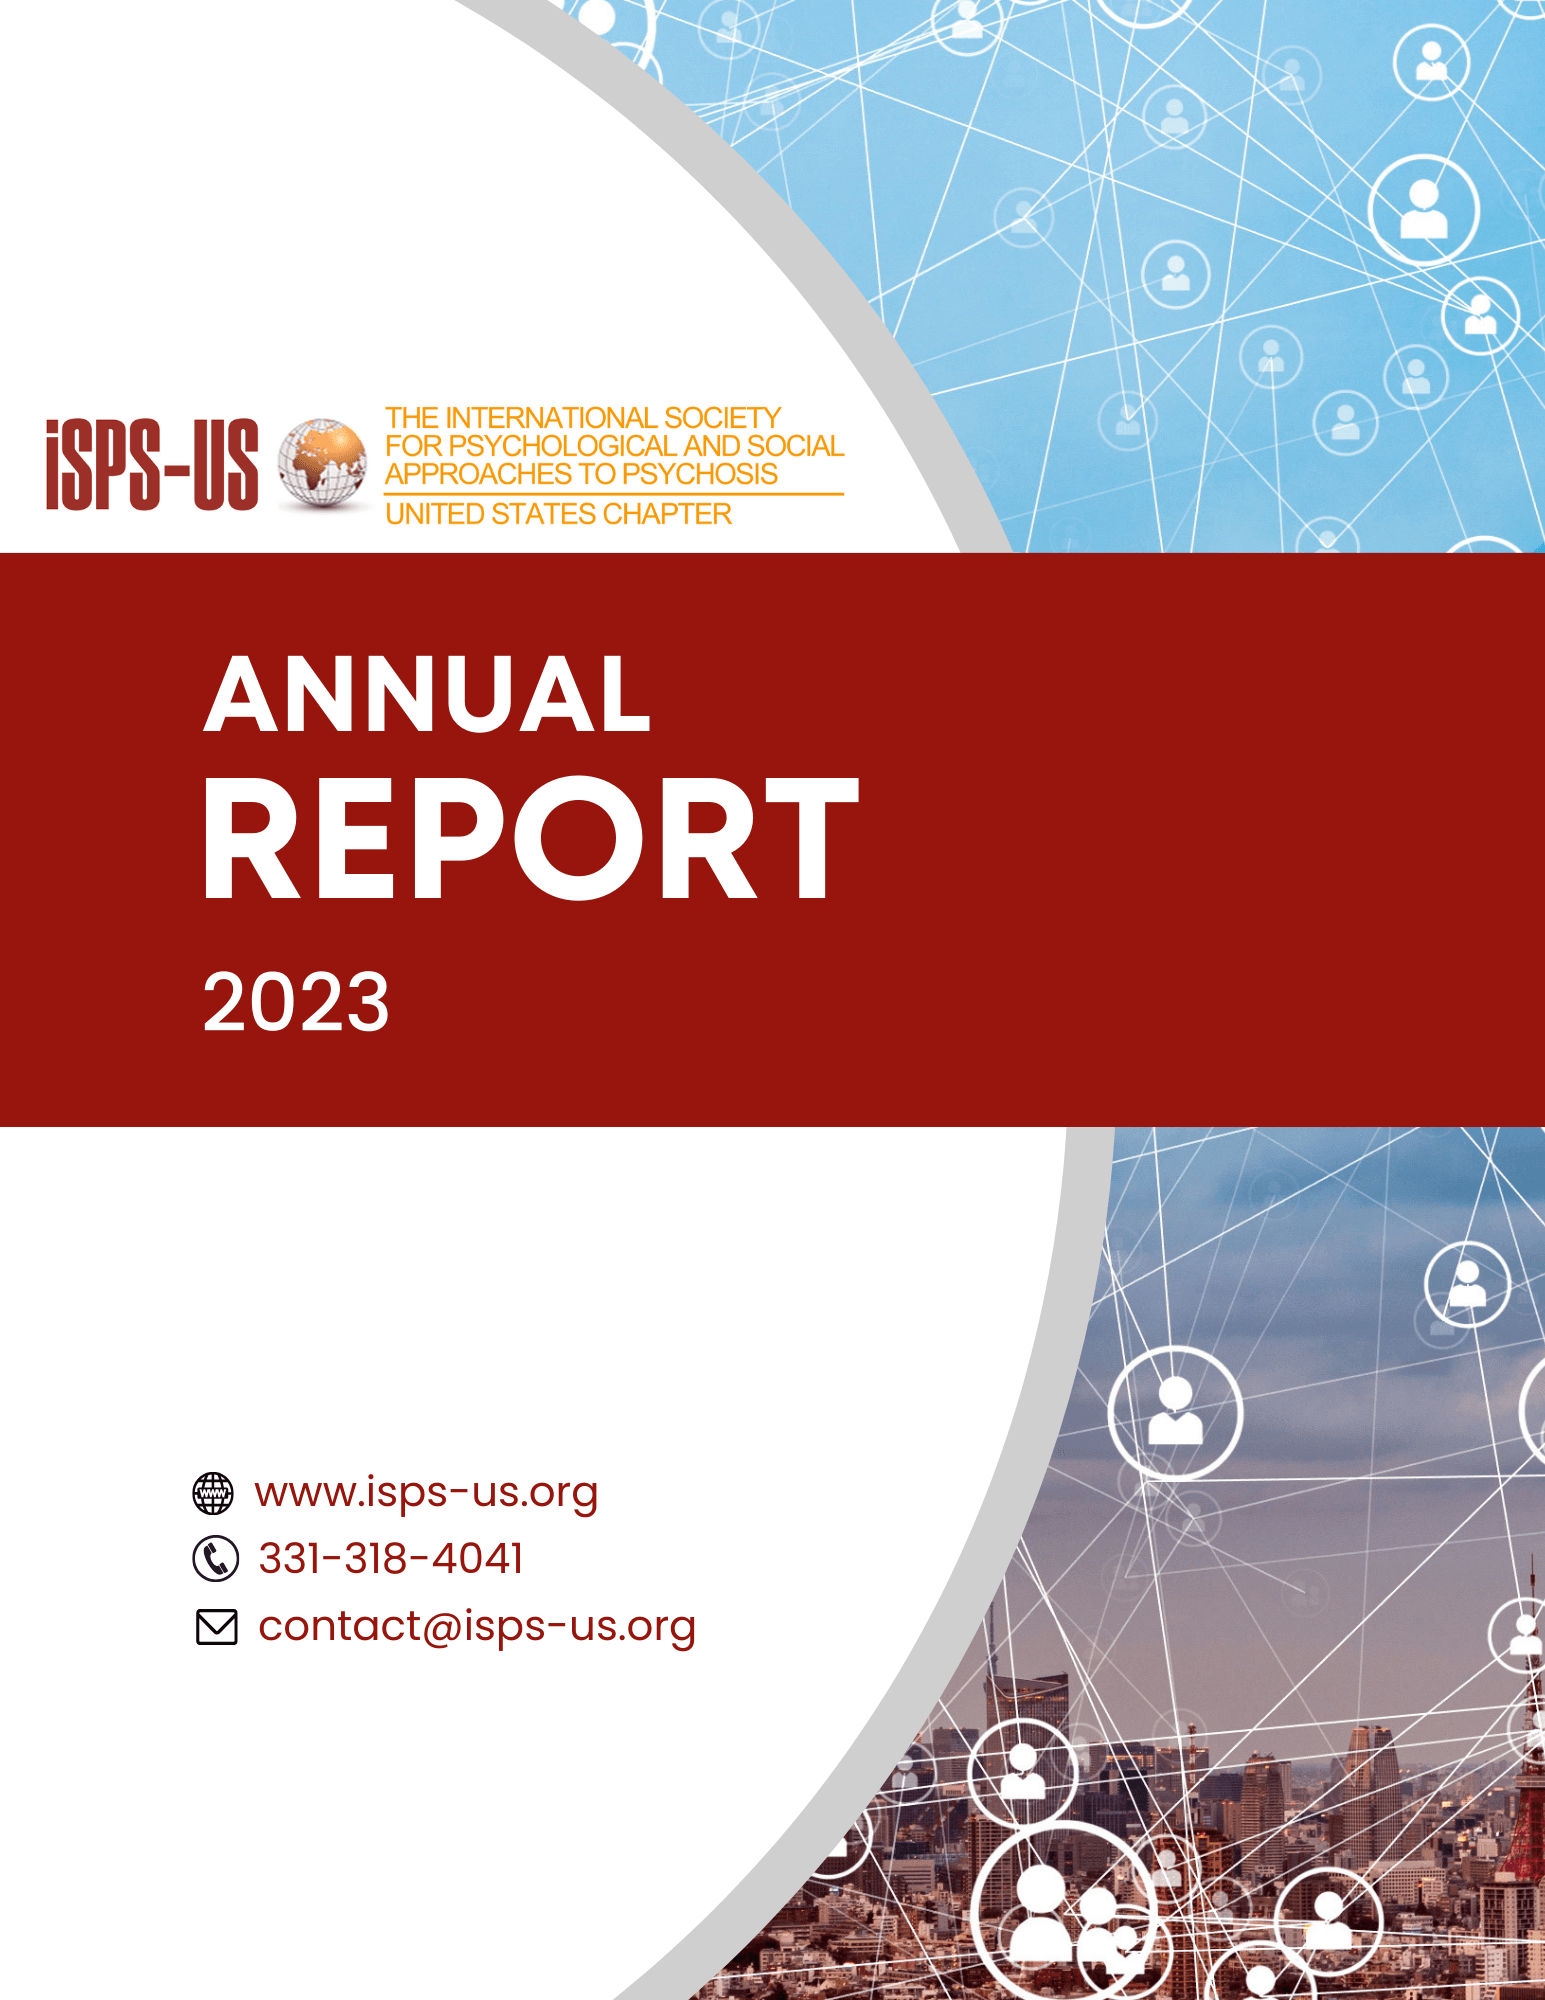 ISPS-US 2023 Annual Report Now Out